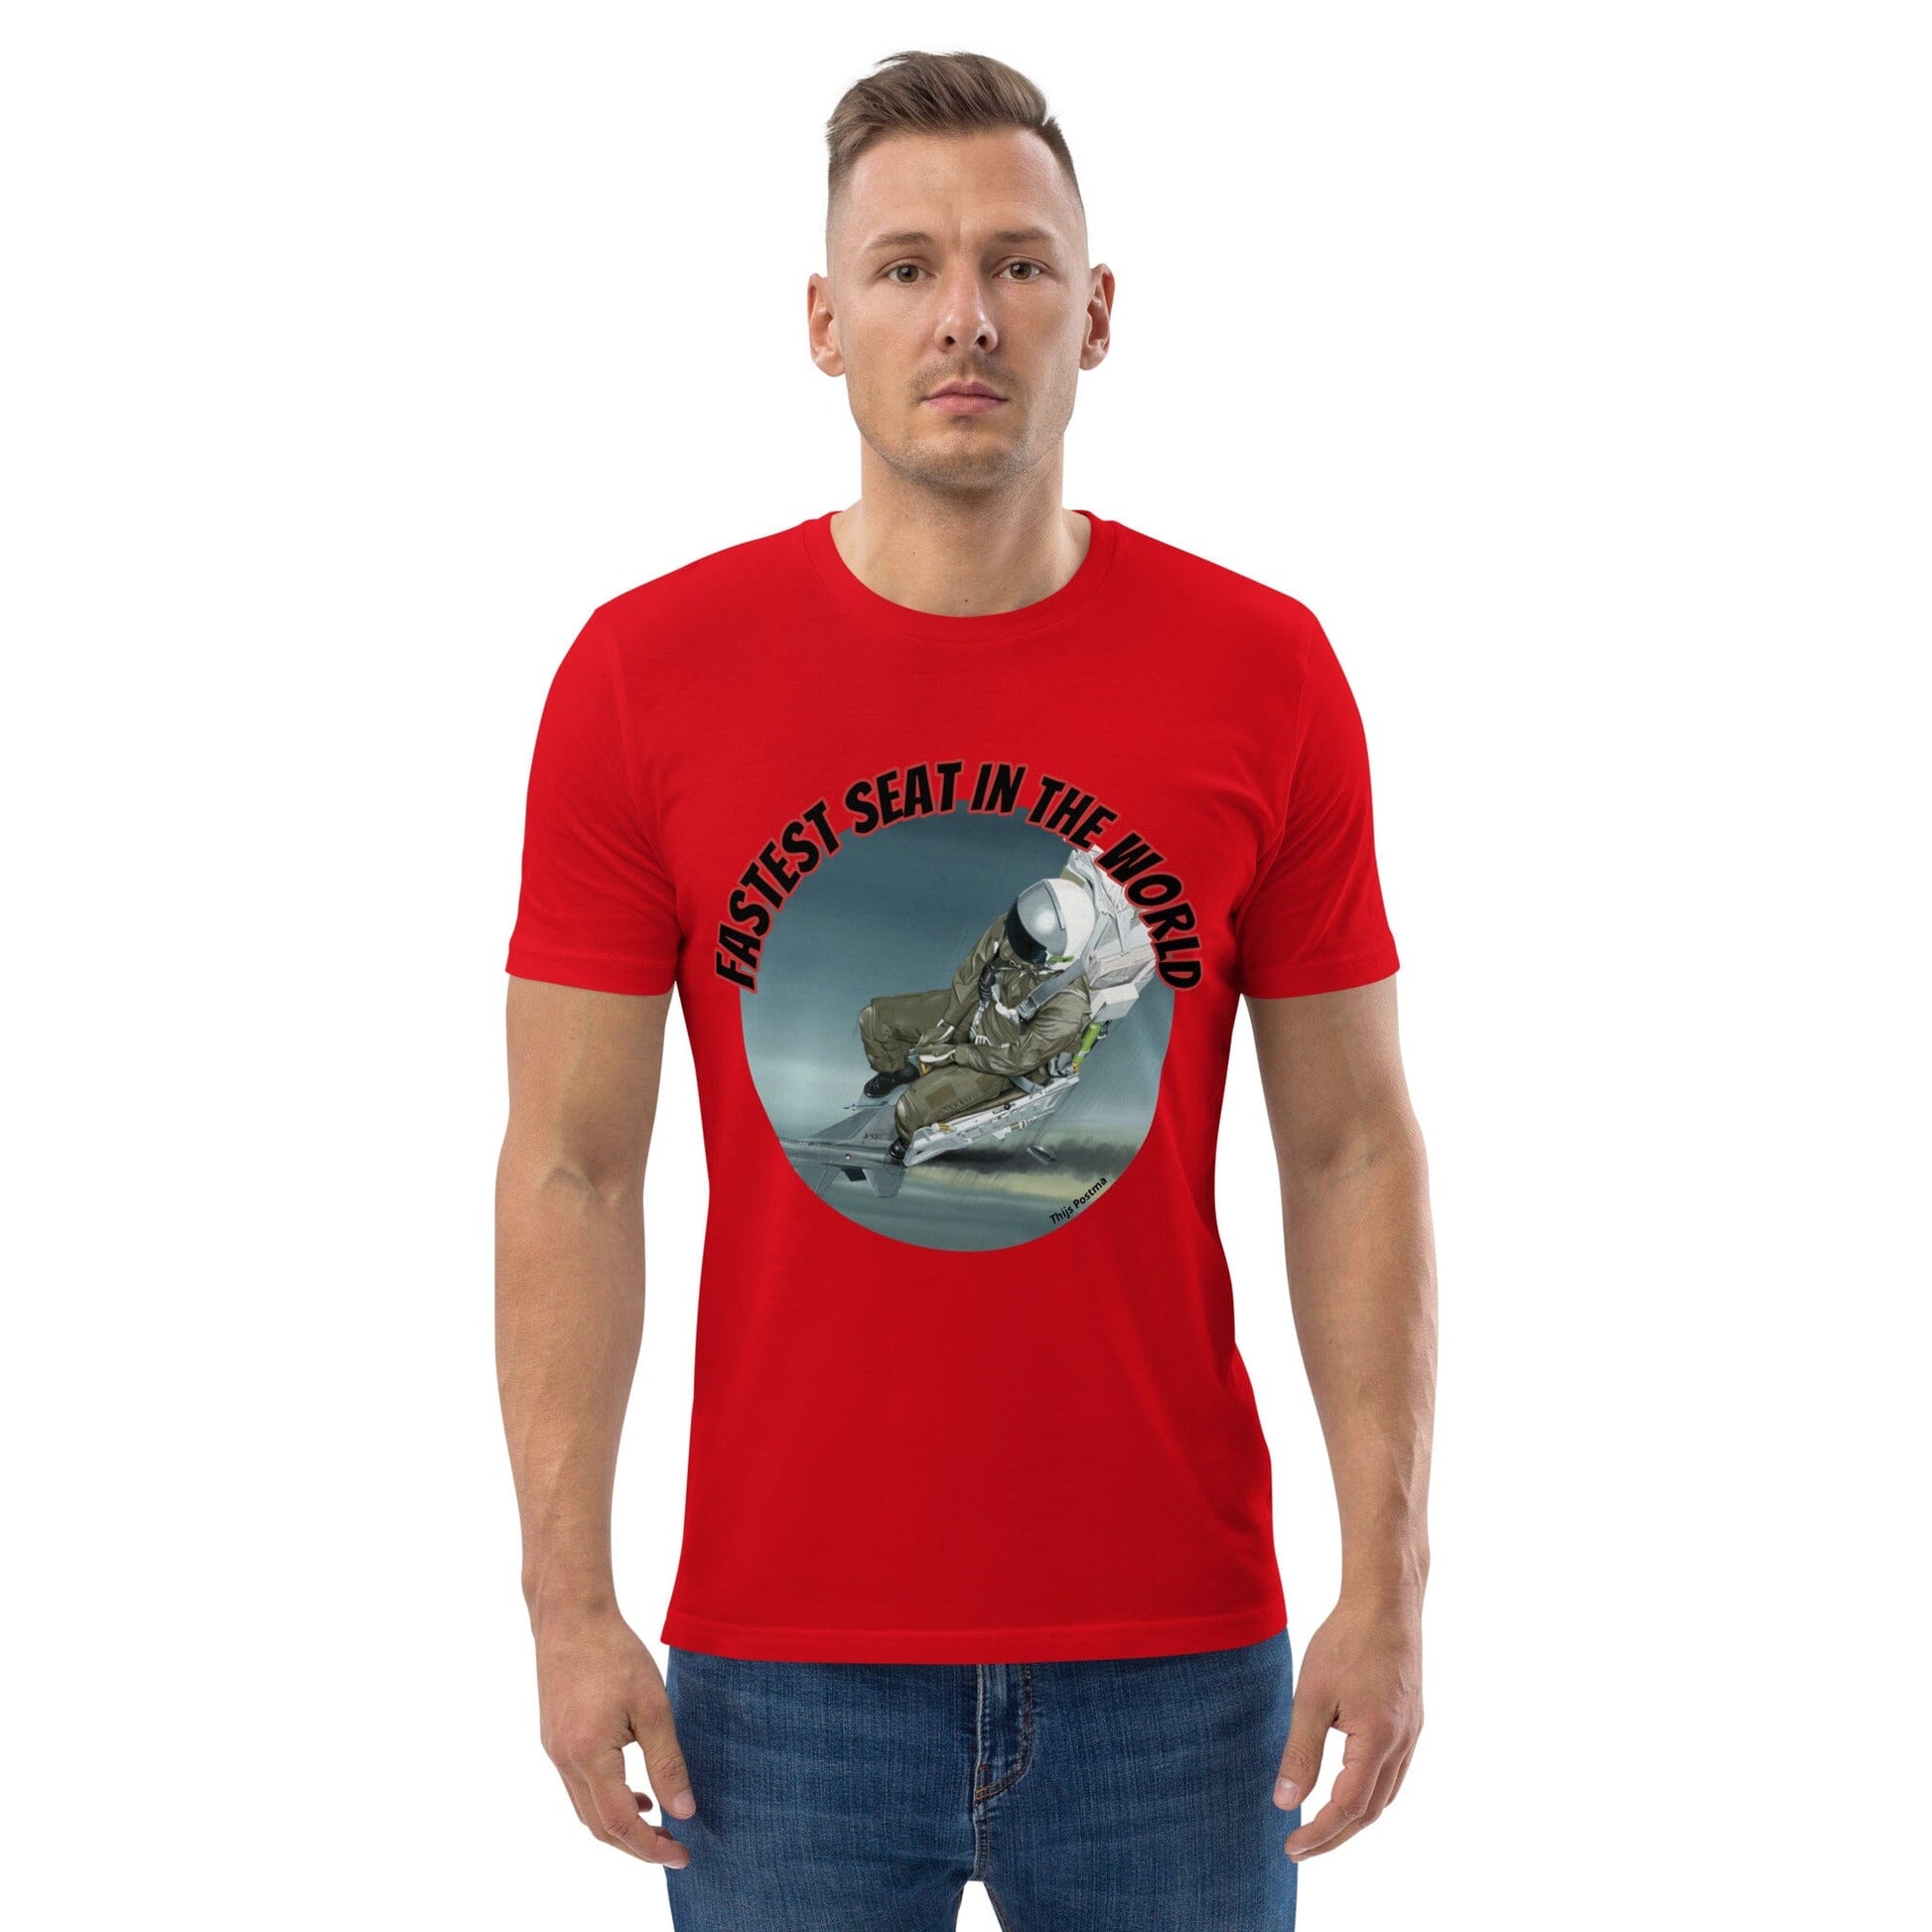 Thijs Postma - T-shirt - F-16A Falcon Ejection Seat - Unisex Organic Cotton T-shirt TP Aviation Art Red S 